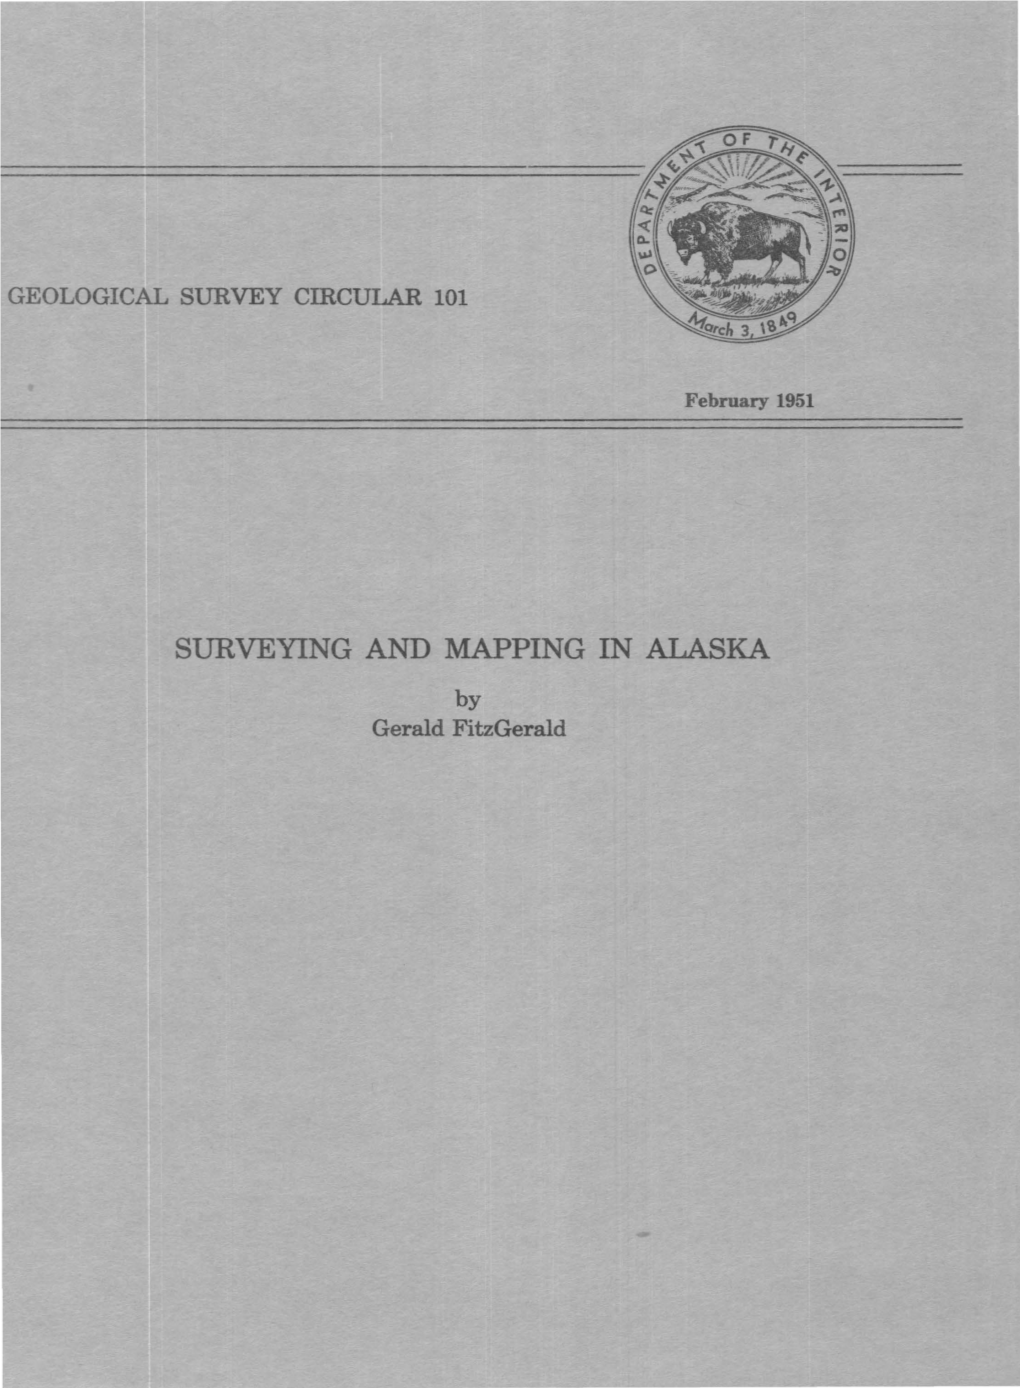 SURVEYING and MAPPING in ALASKA by Gerald Fitzgerald UNITED STATES DEPARTMENT of the INTERIOR OSCAR L